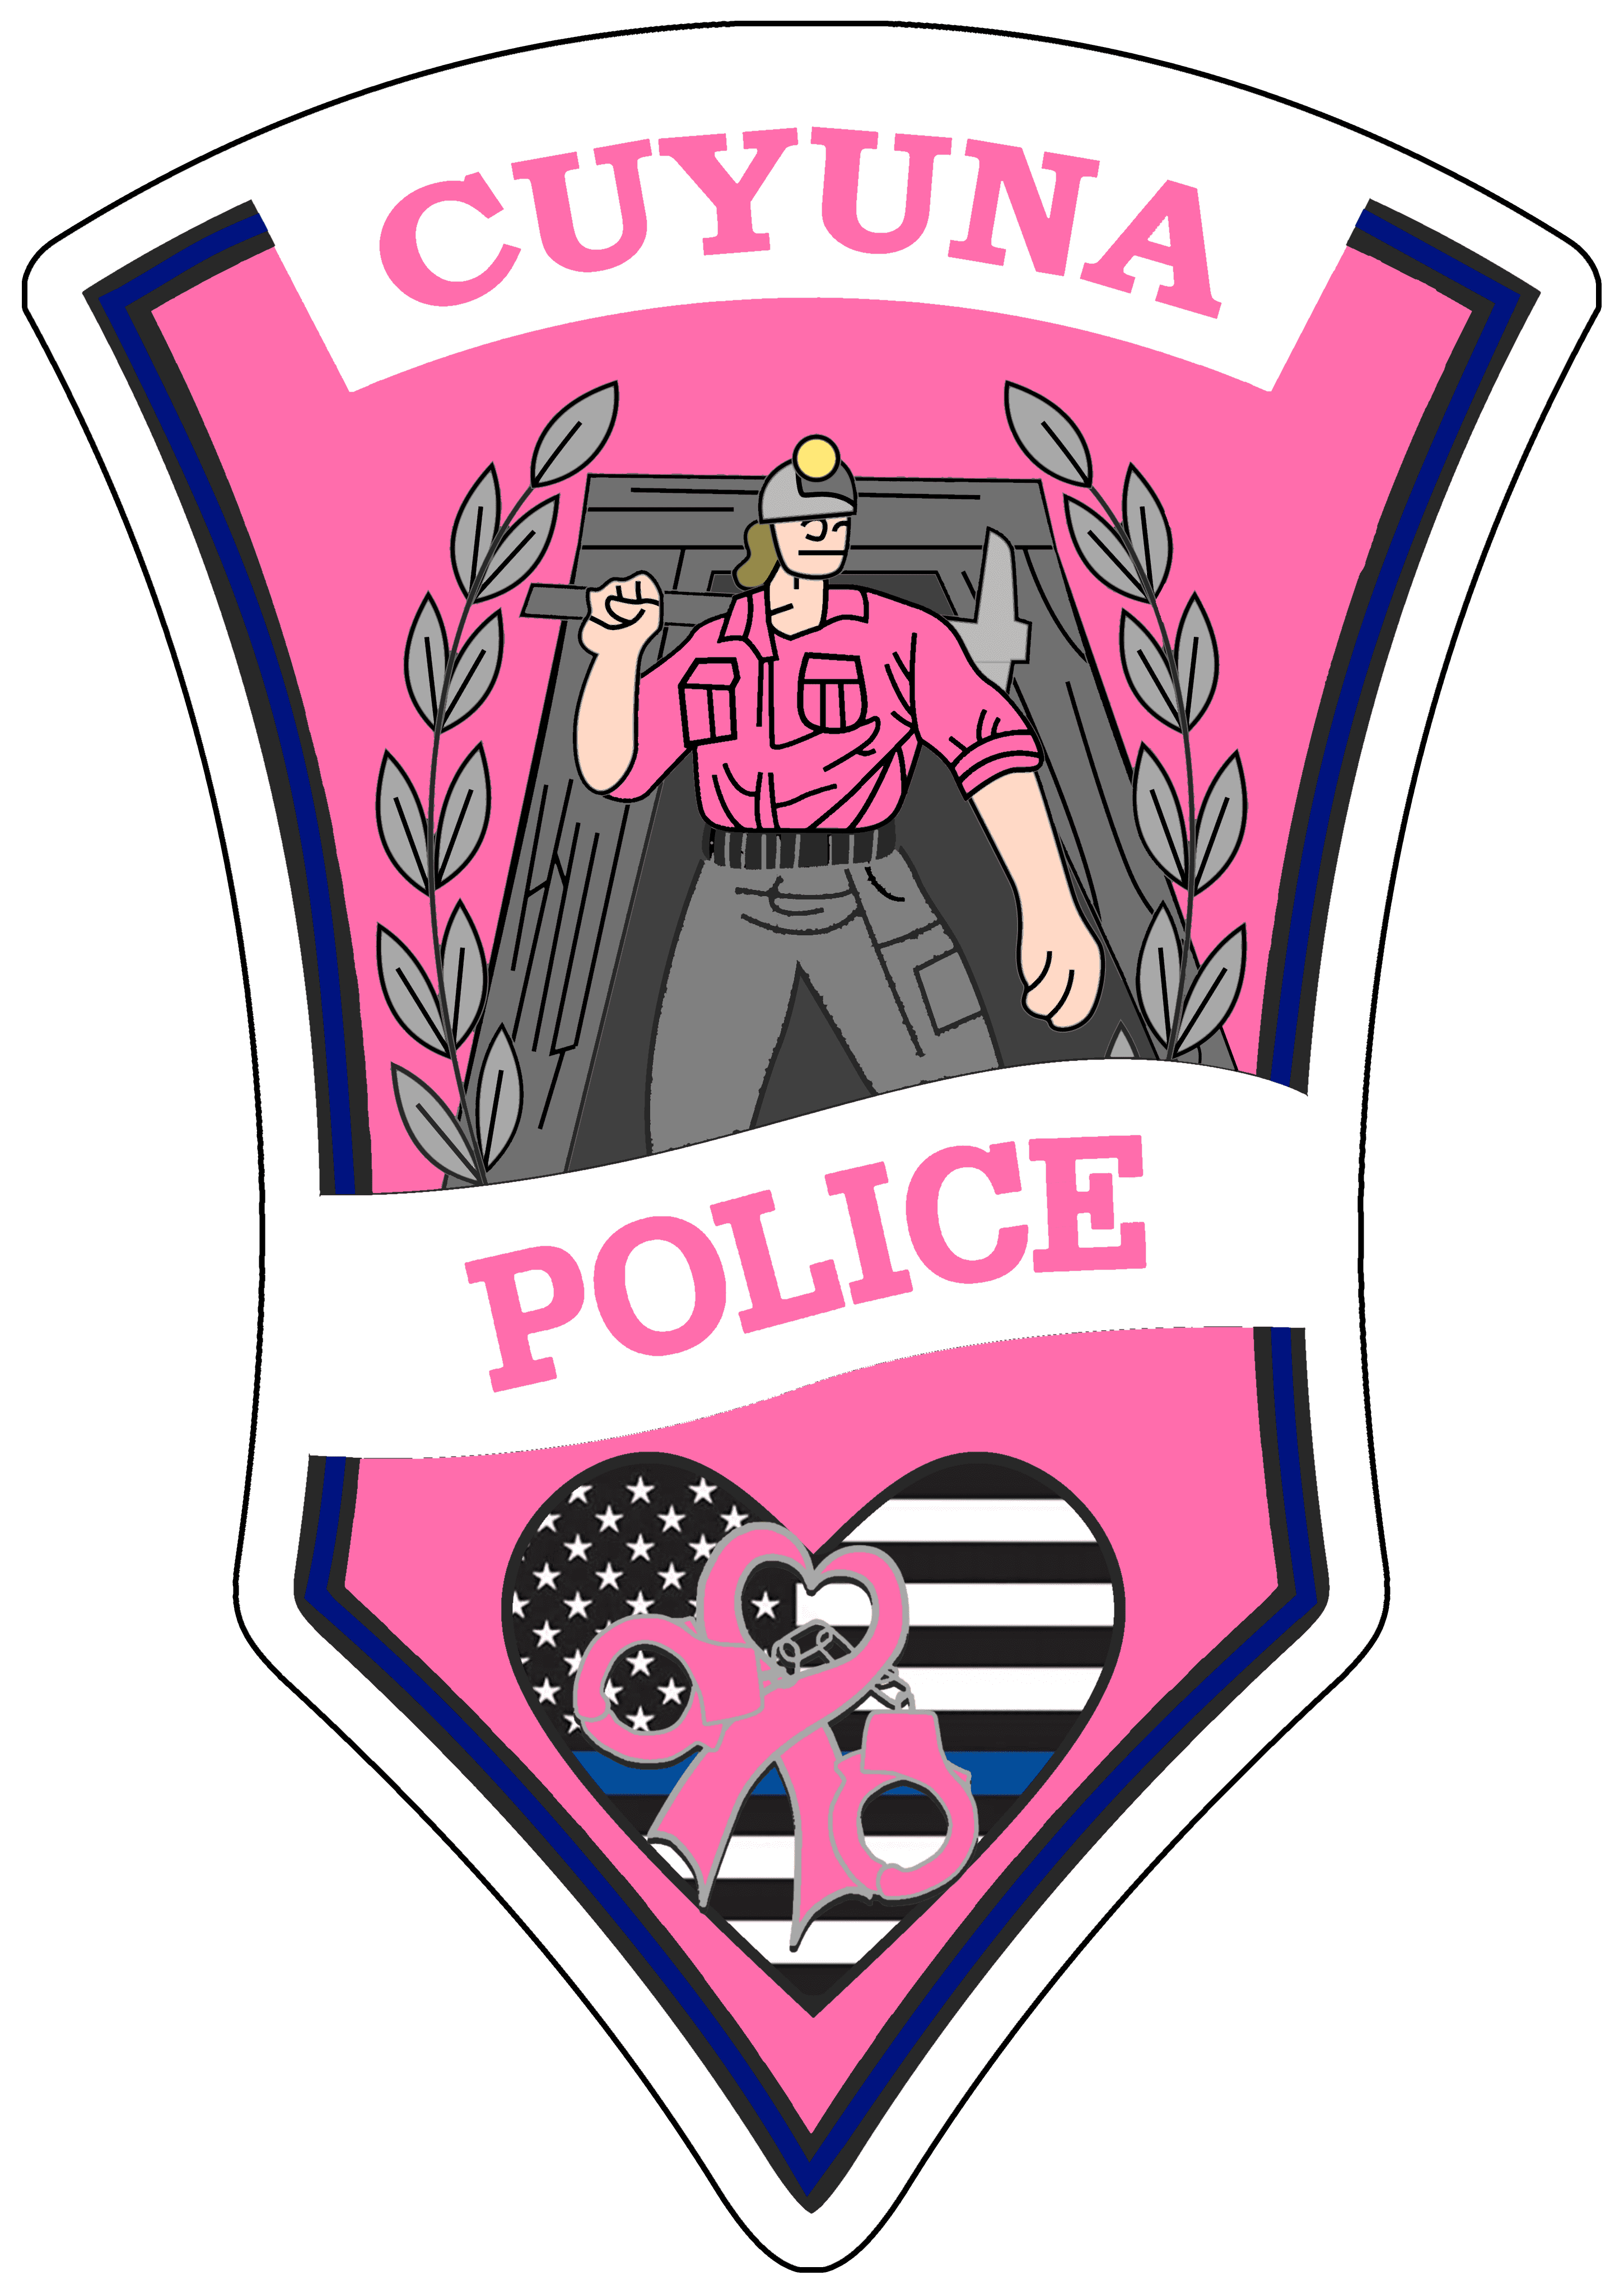 2022 Pink Patch